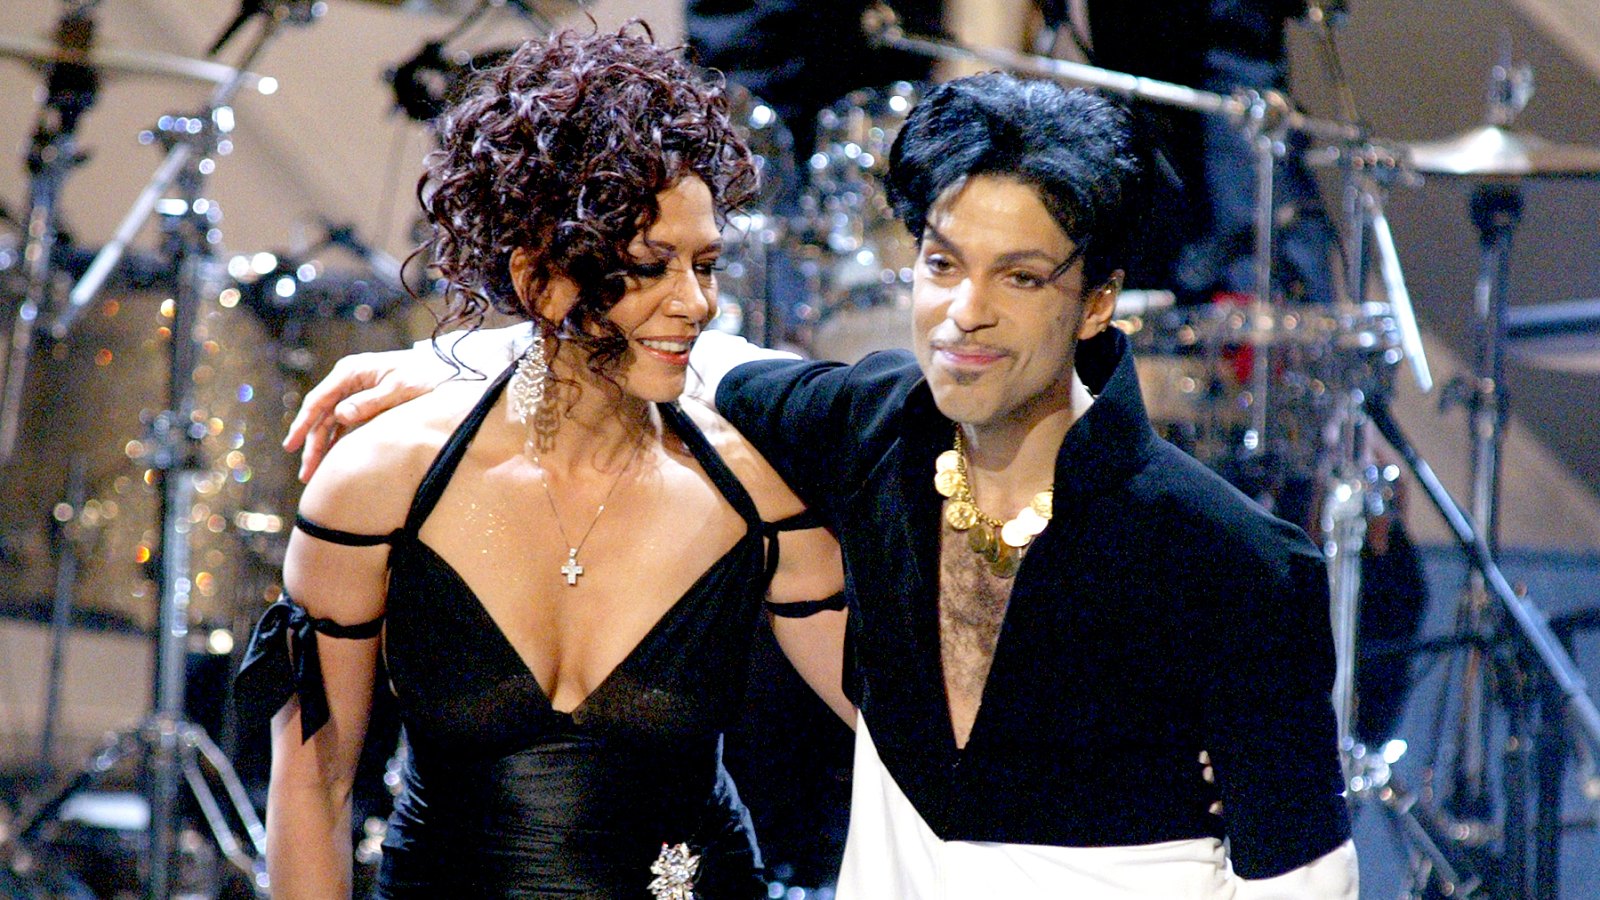 Sheila E. and Prince during The 36th Annual NAACP Image Awards in 2005.